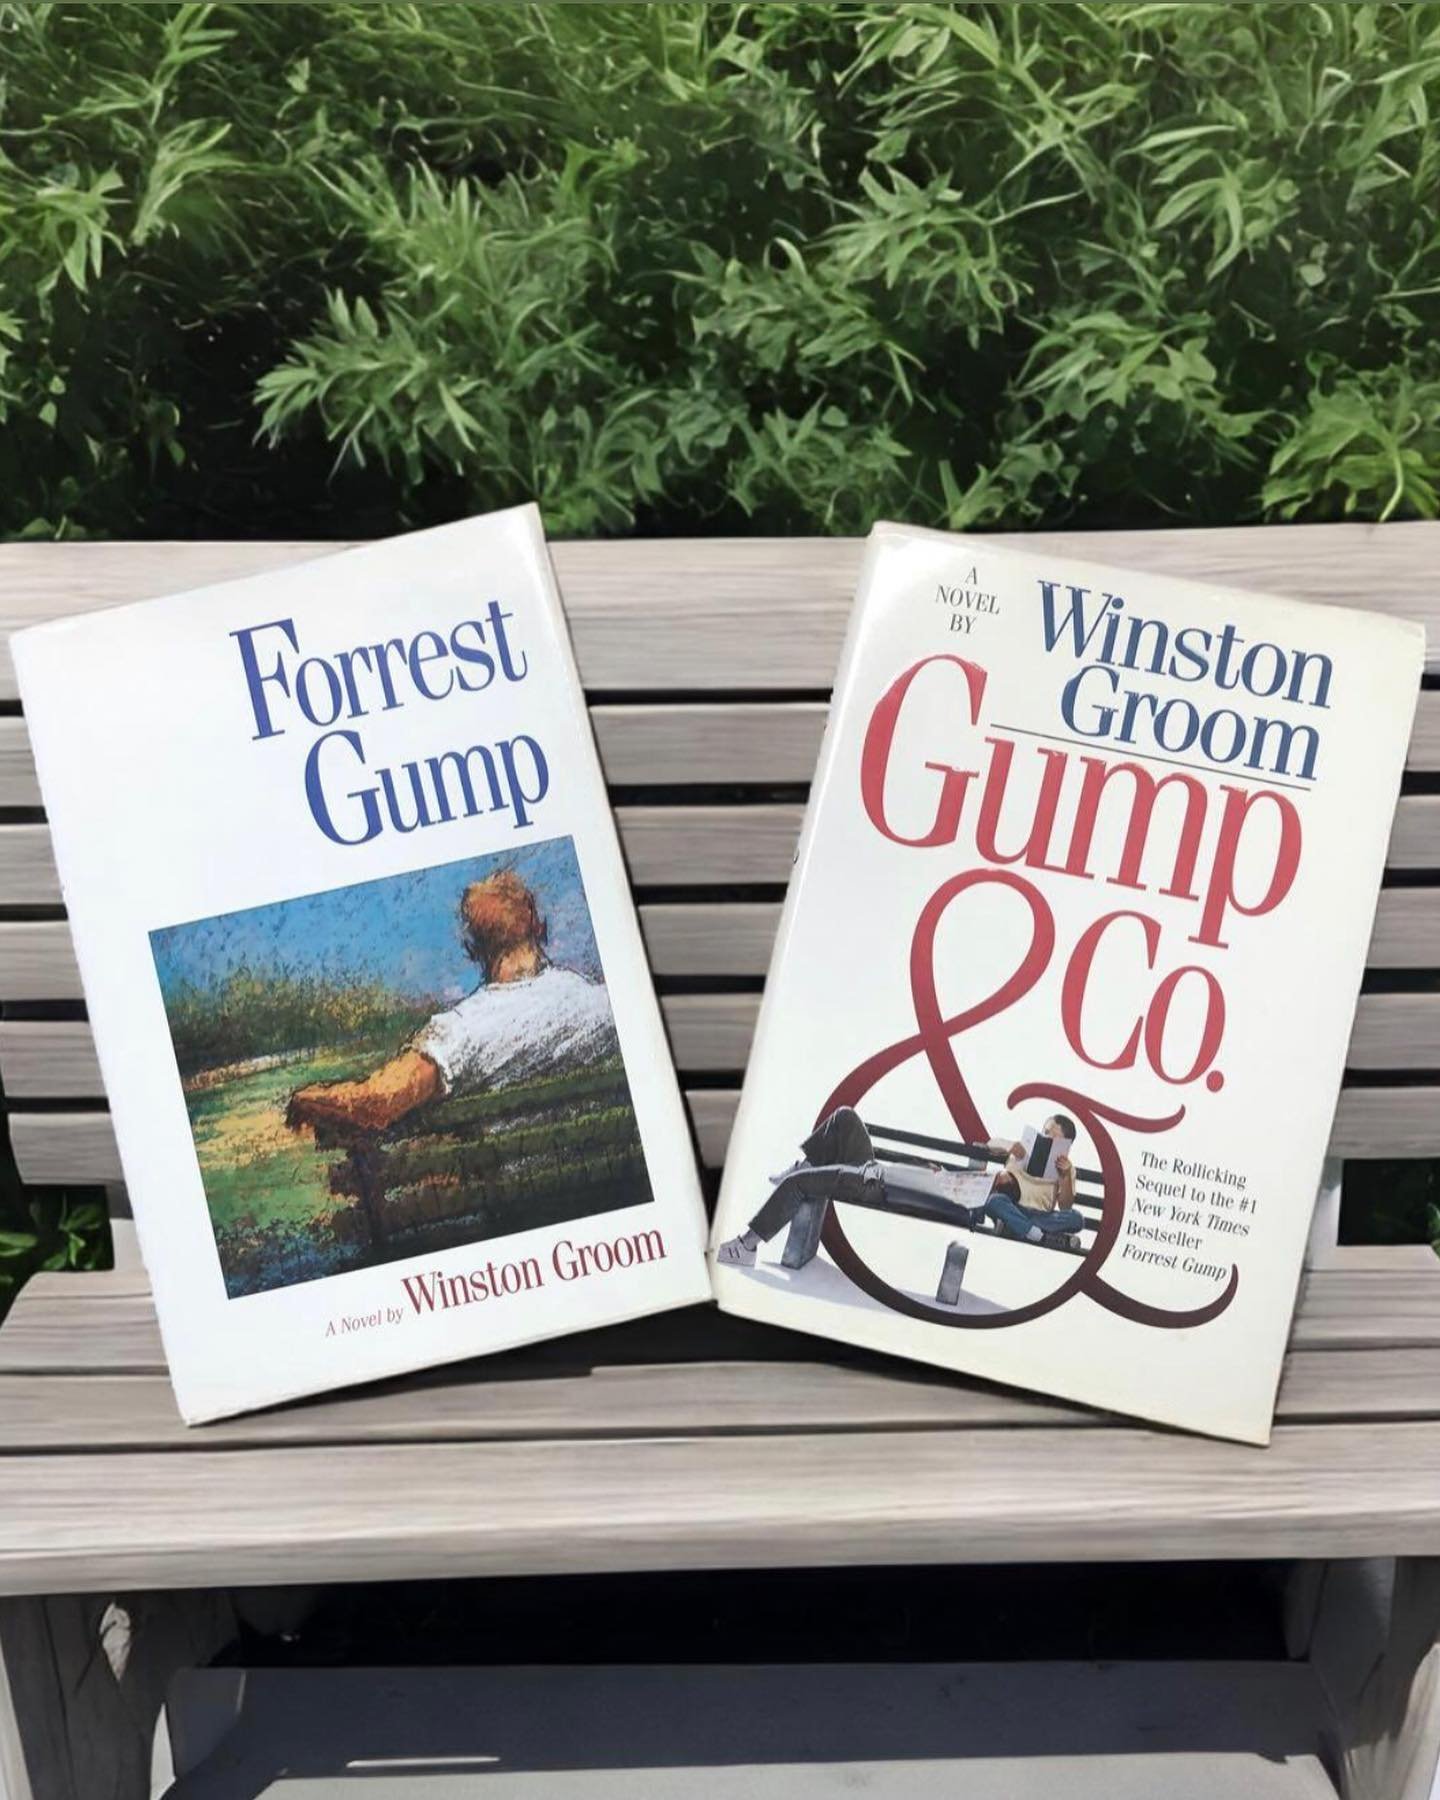 Did you know that there was a sequel to Forest Gump? There is! You can see it in the picture!
#bookstagram #bookstagrammer #bibliophile 
#forestgump #winstongroom 
@thegarageon25